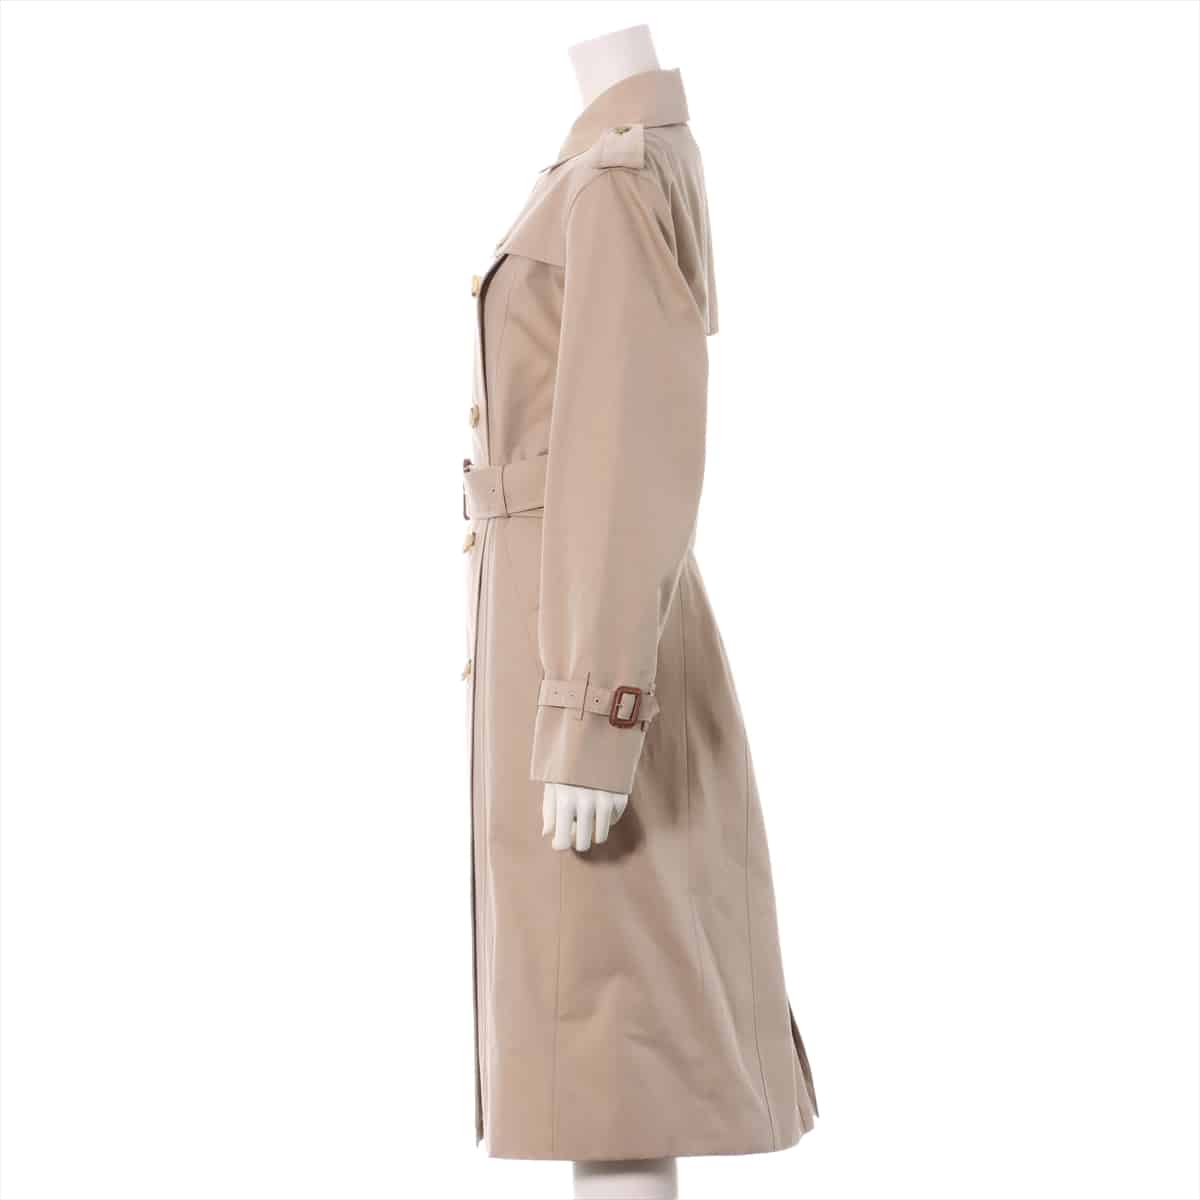 Burberry London Cotton Trench coat 9 Ladies' Beige Lined